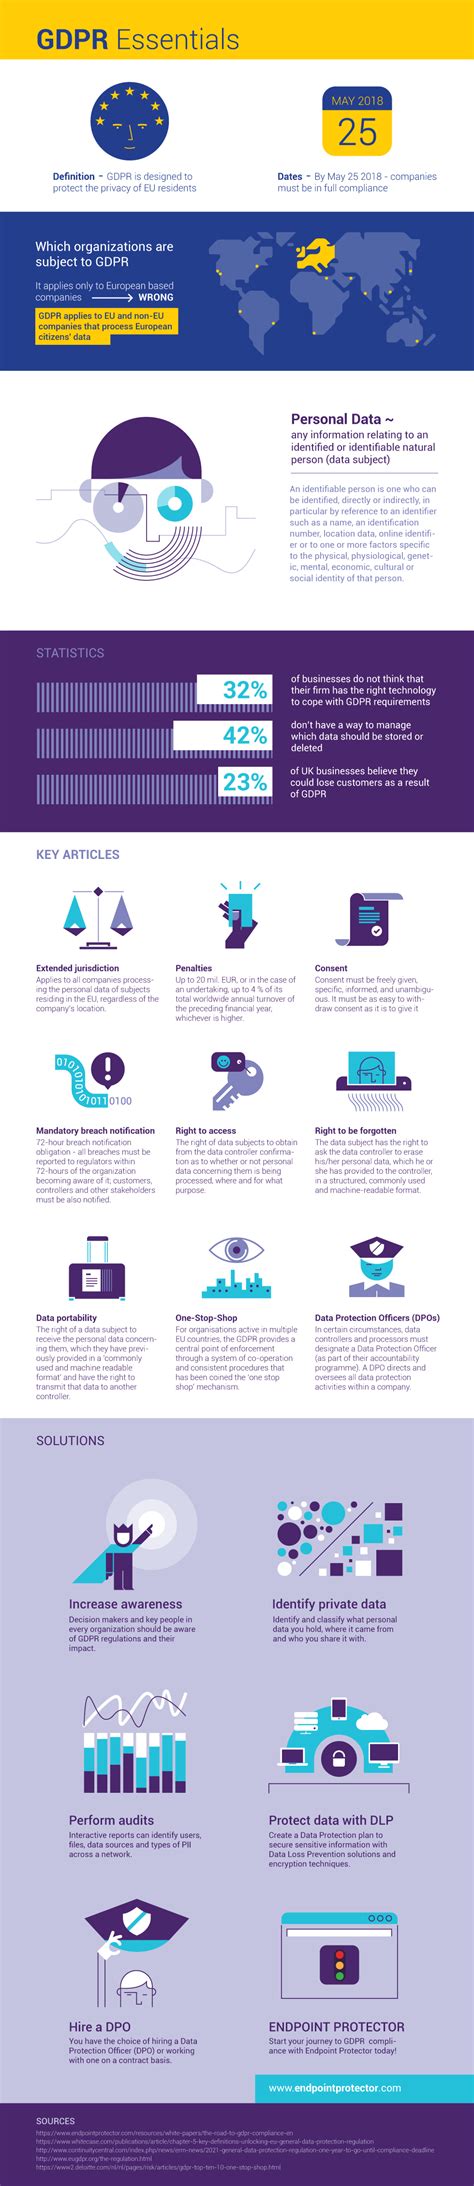 Gdpr Infographic Checklist And Essentials Endpoint Protector